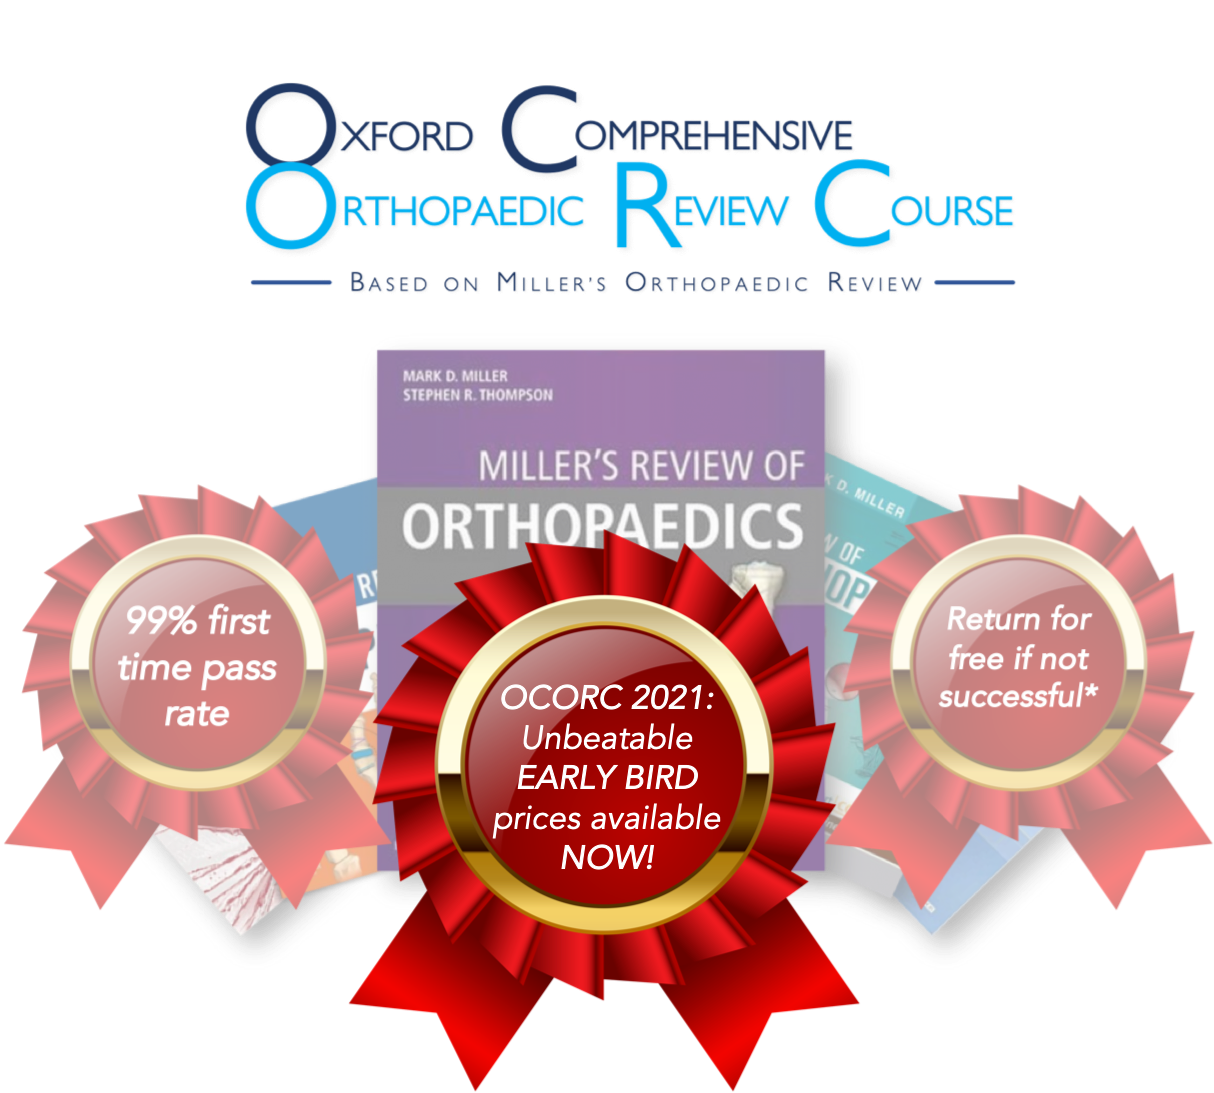 Oxford Comprehensive Orthopaedic Review